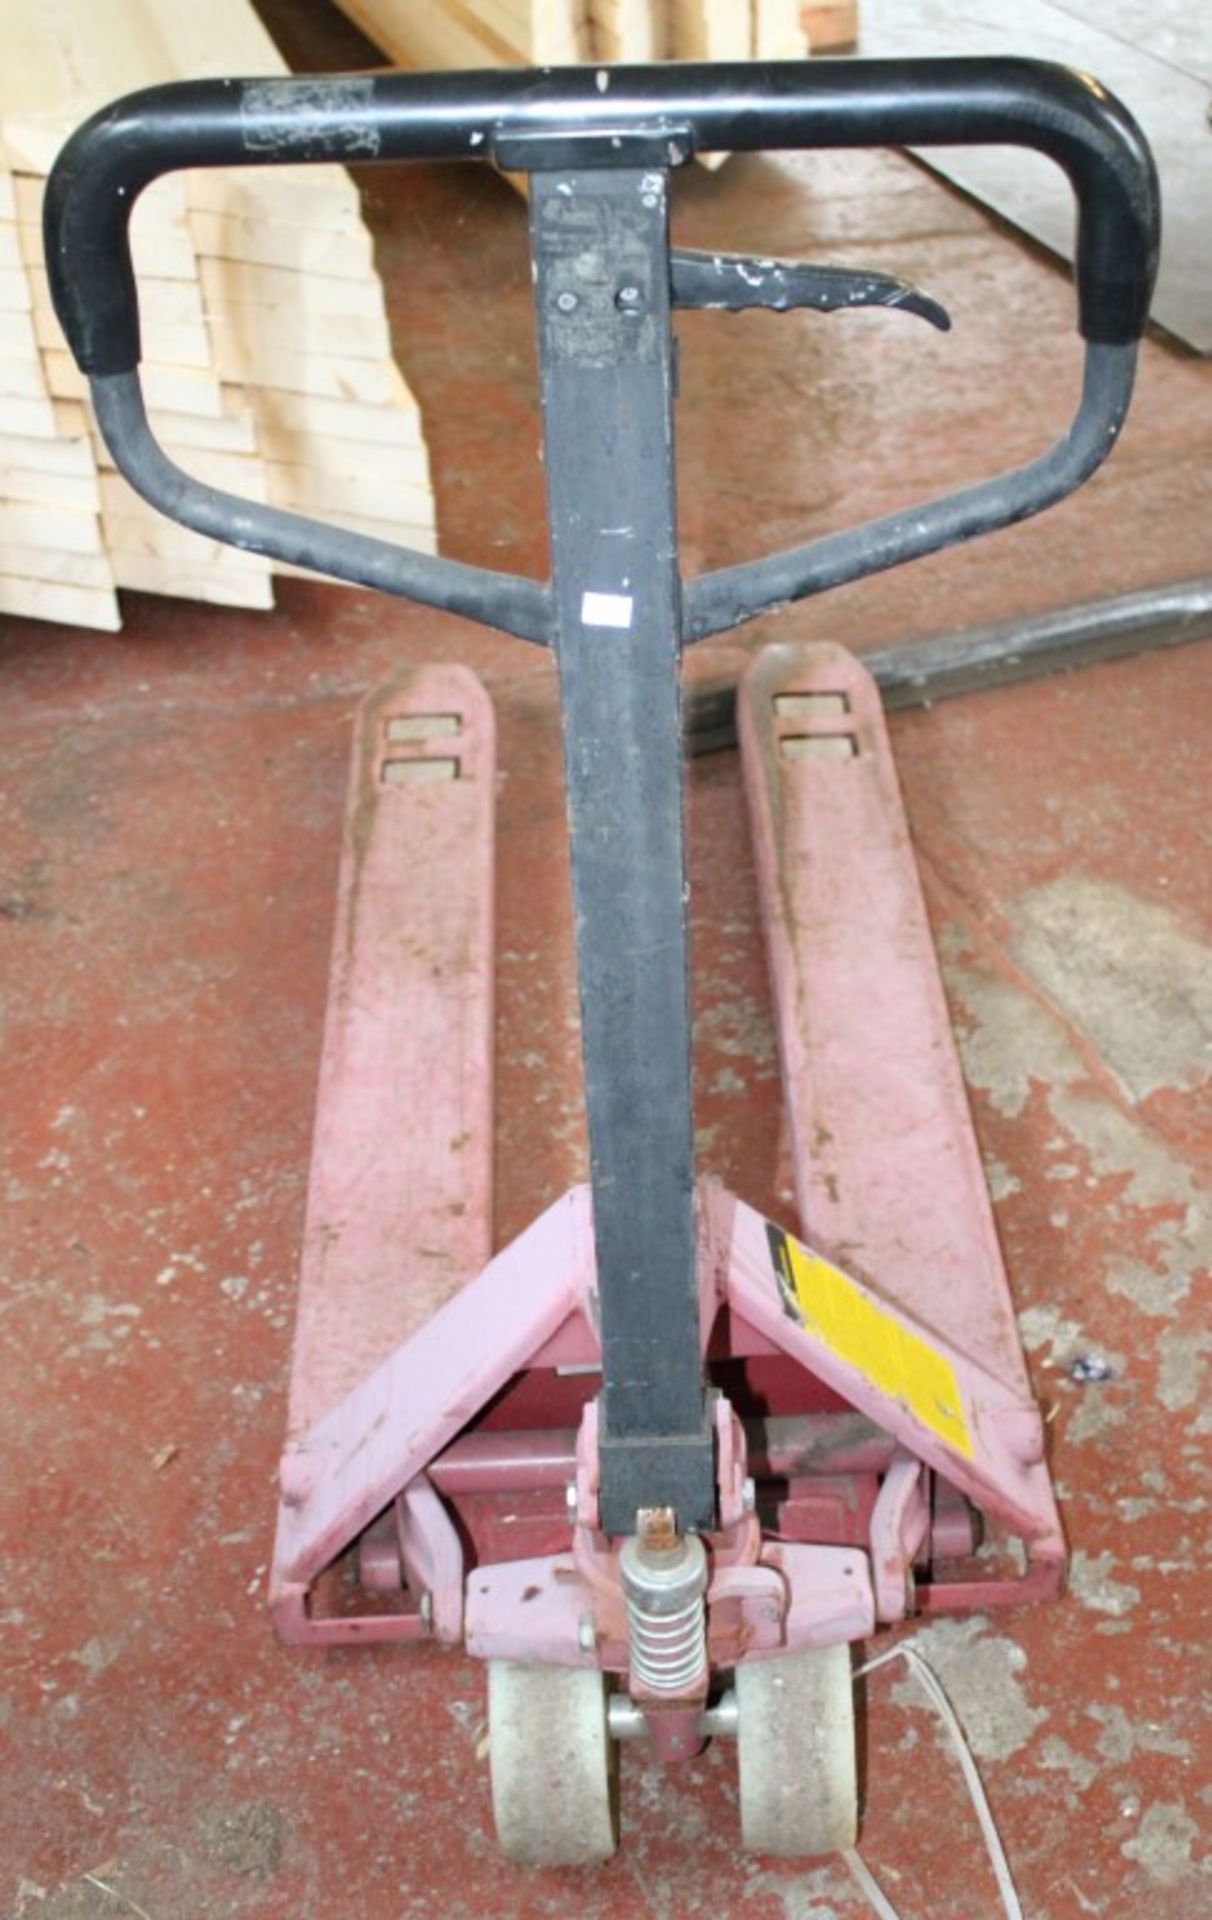 1 x Warrior Pallet Pump Truck - 2500kg Capacity - CL151 - Ref R018 - Location: Manchester - Image 3 of 3